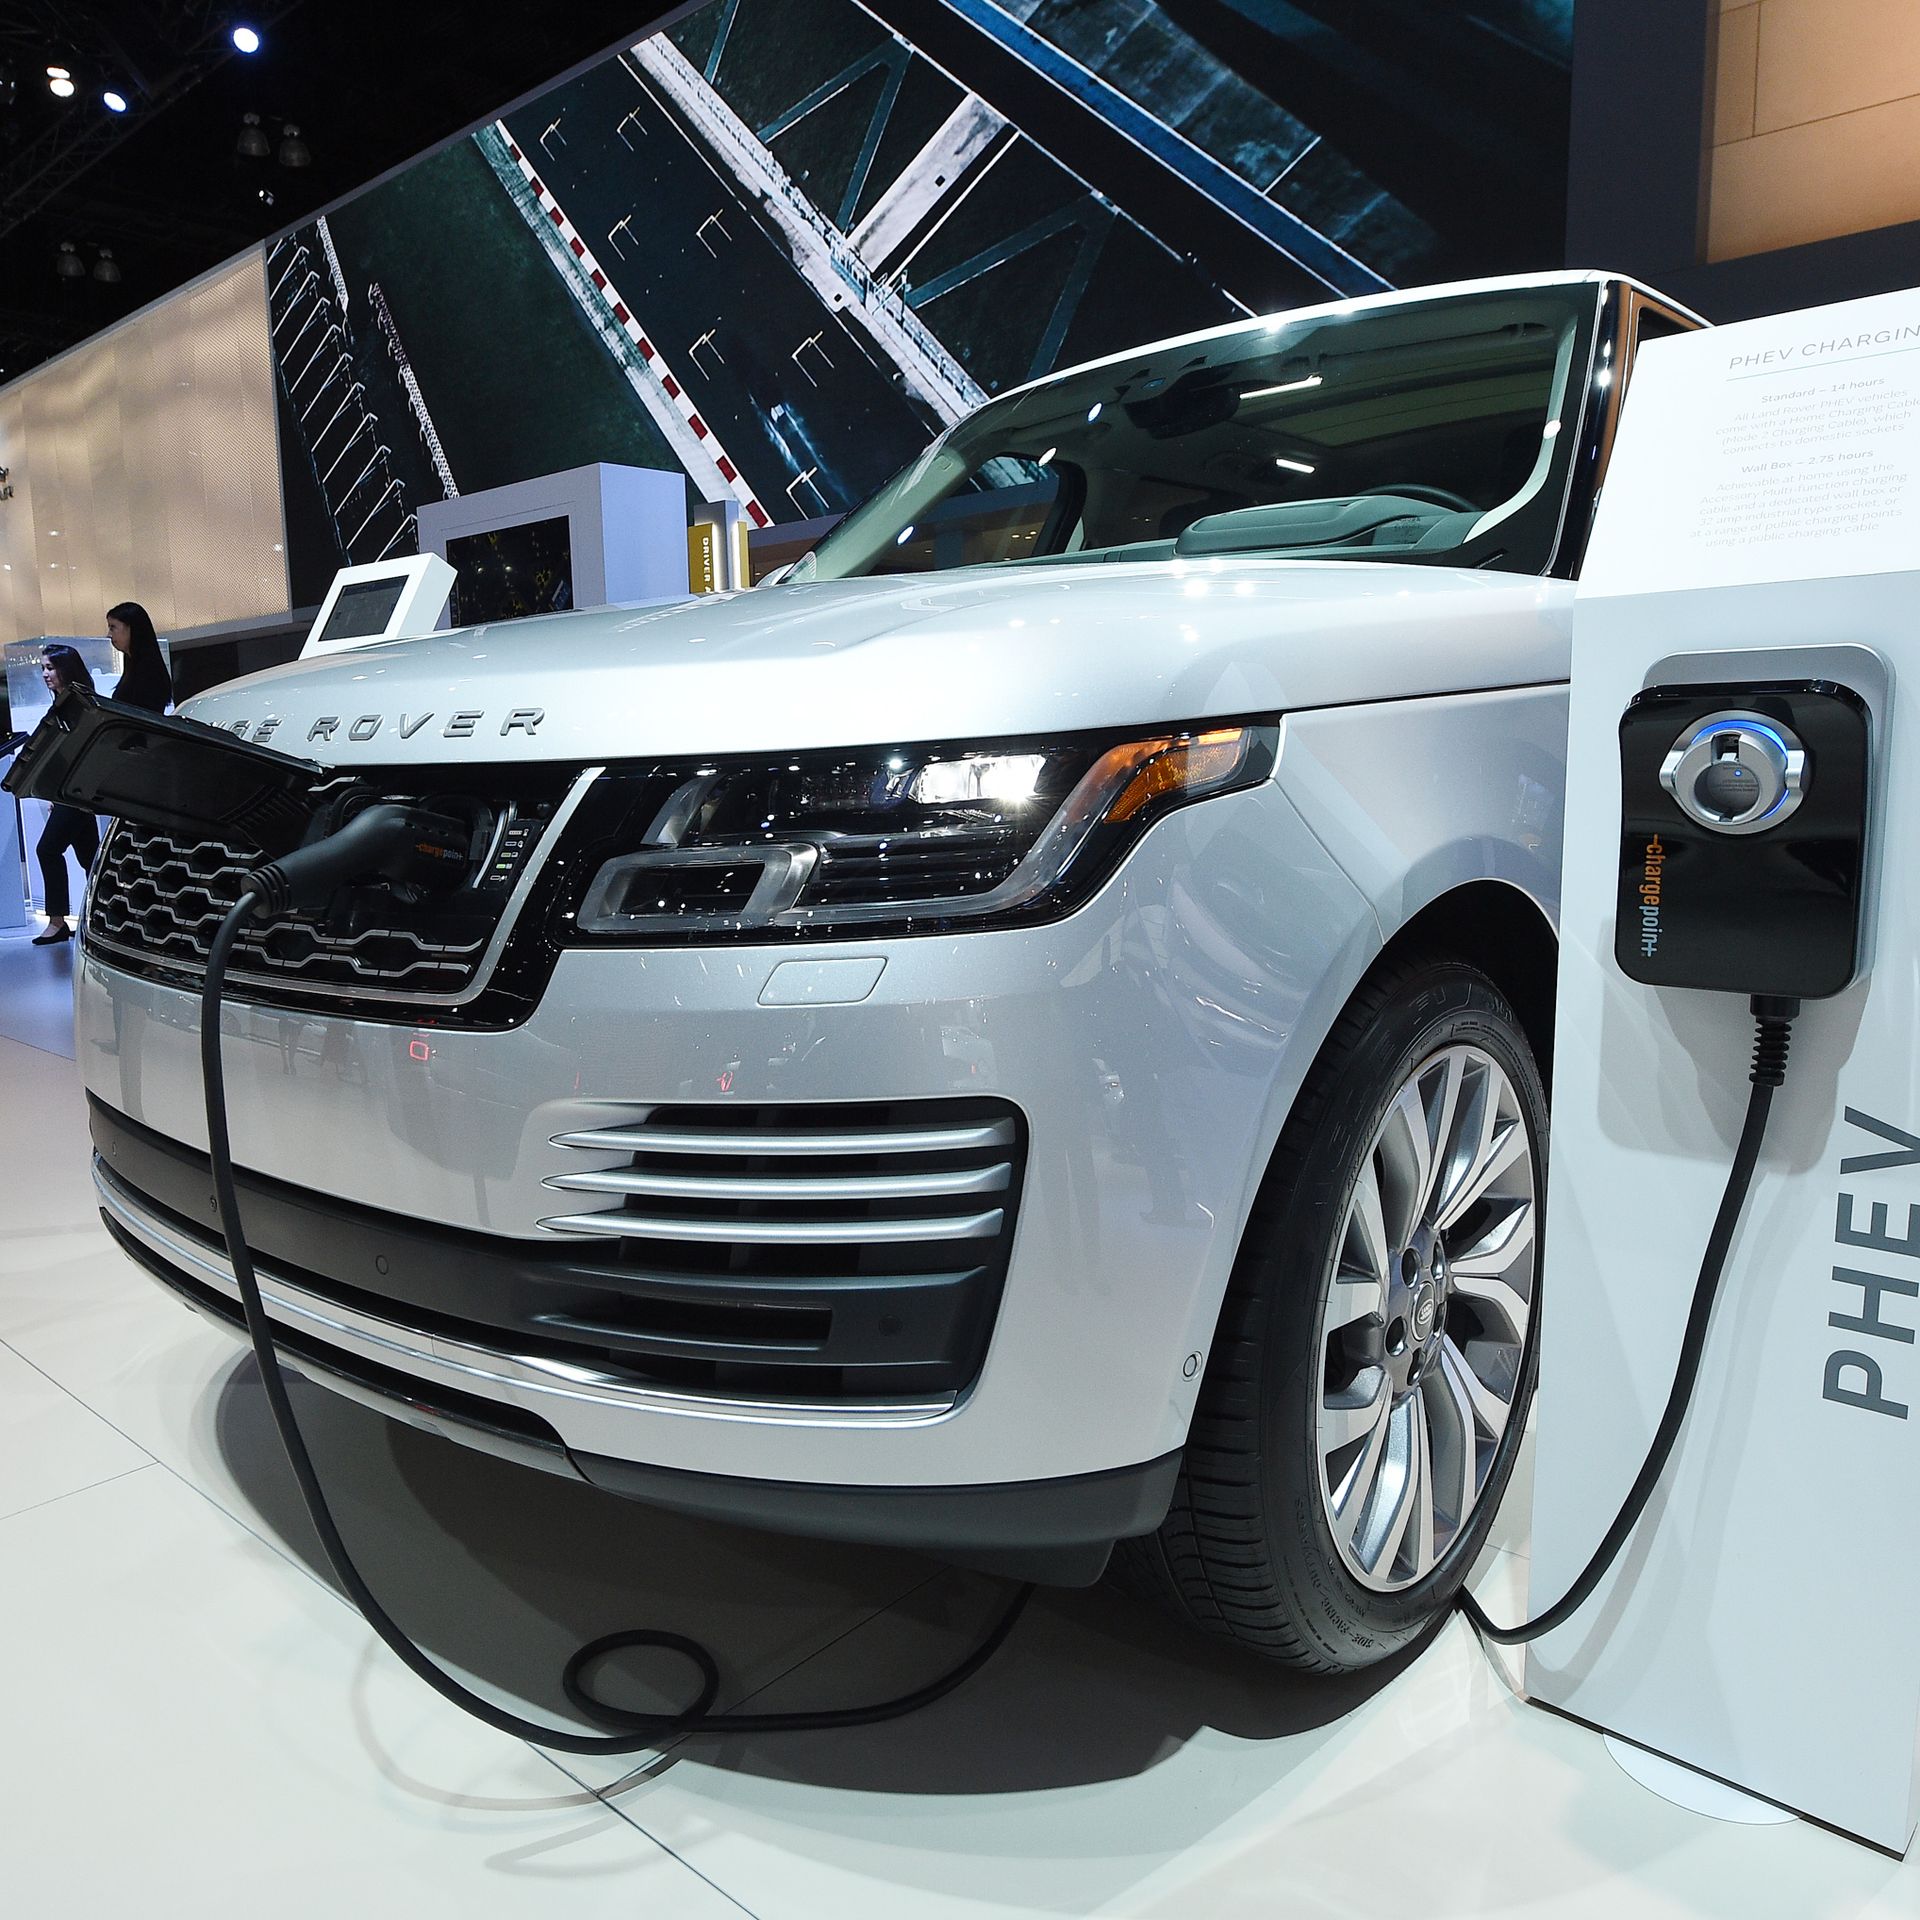 Hybrid Range Rover model and charging station at car show